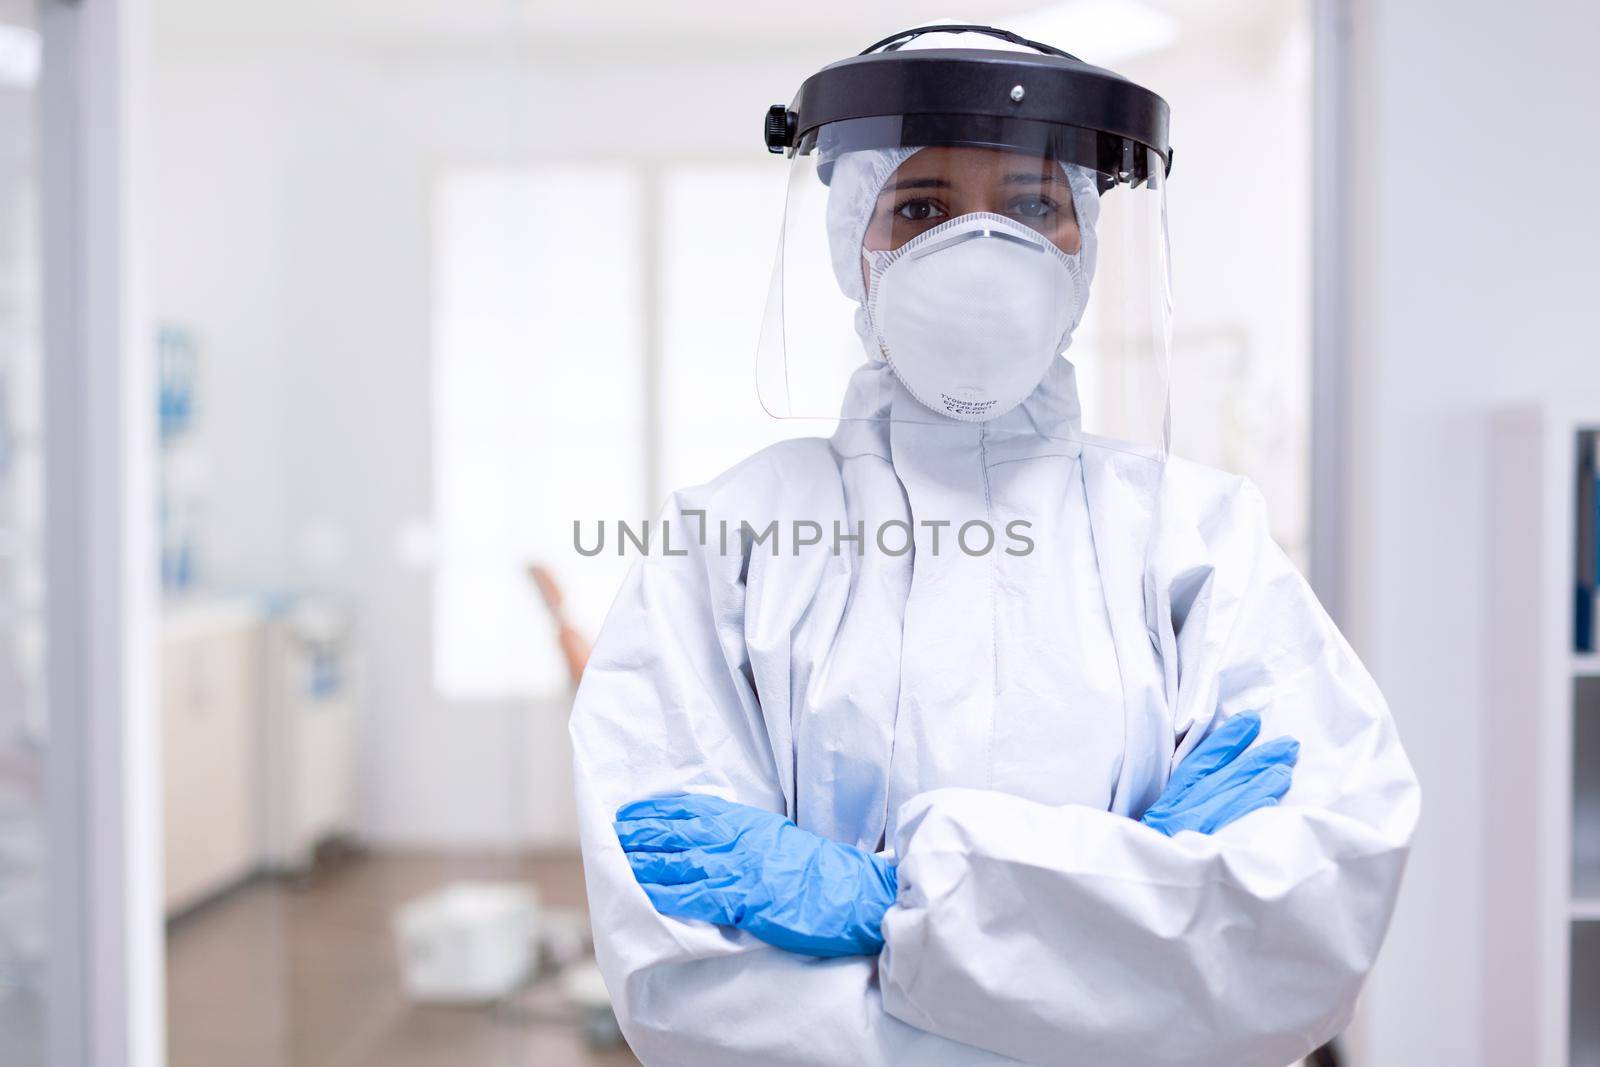 Physician wearing face shield and hazmat suit agasint contamination with coroanvirus by DCStudio